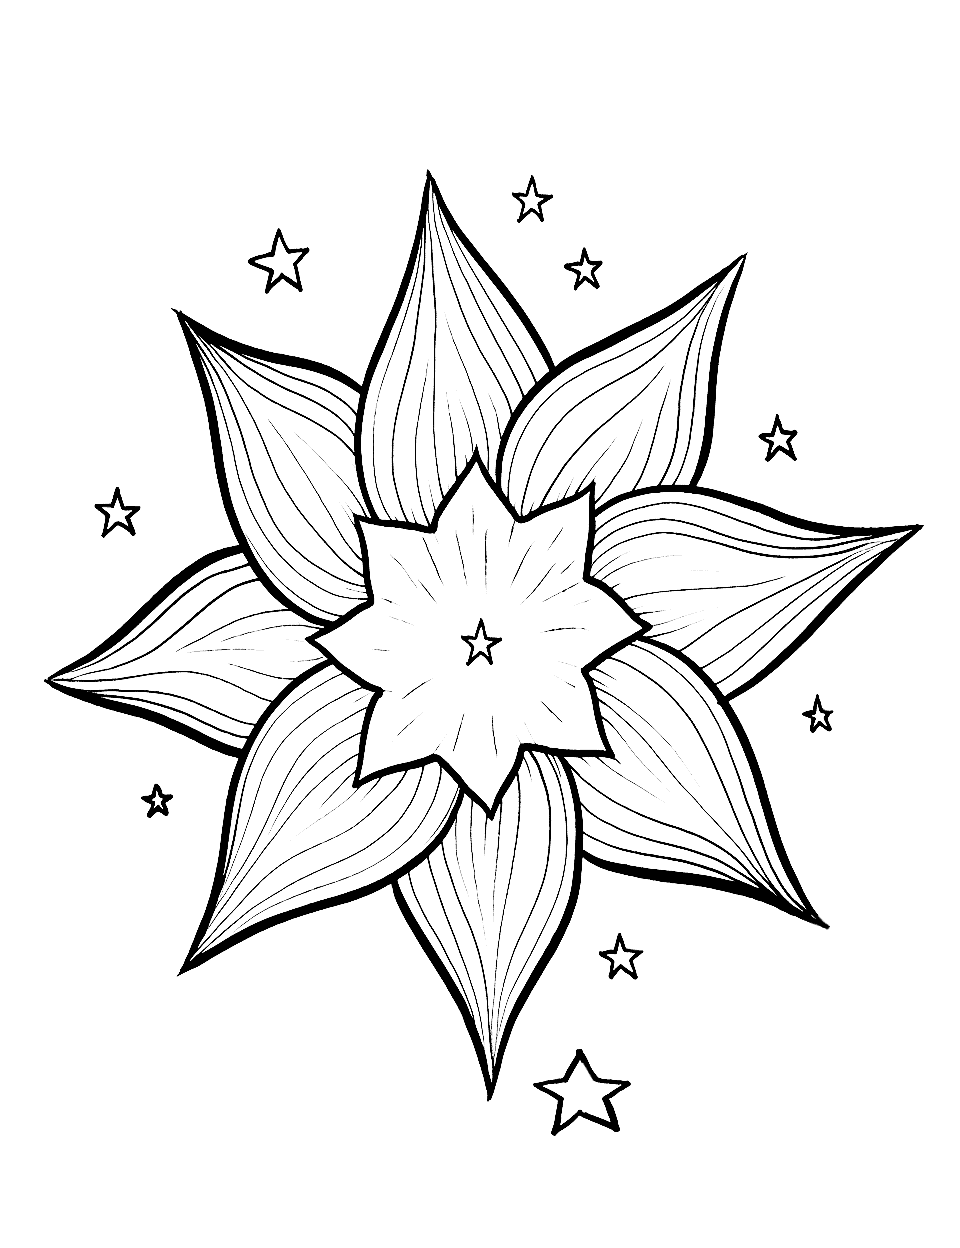 Starflower Star Coloring Page - A flower design with a star pattern in its center.